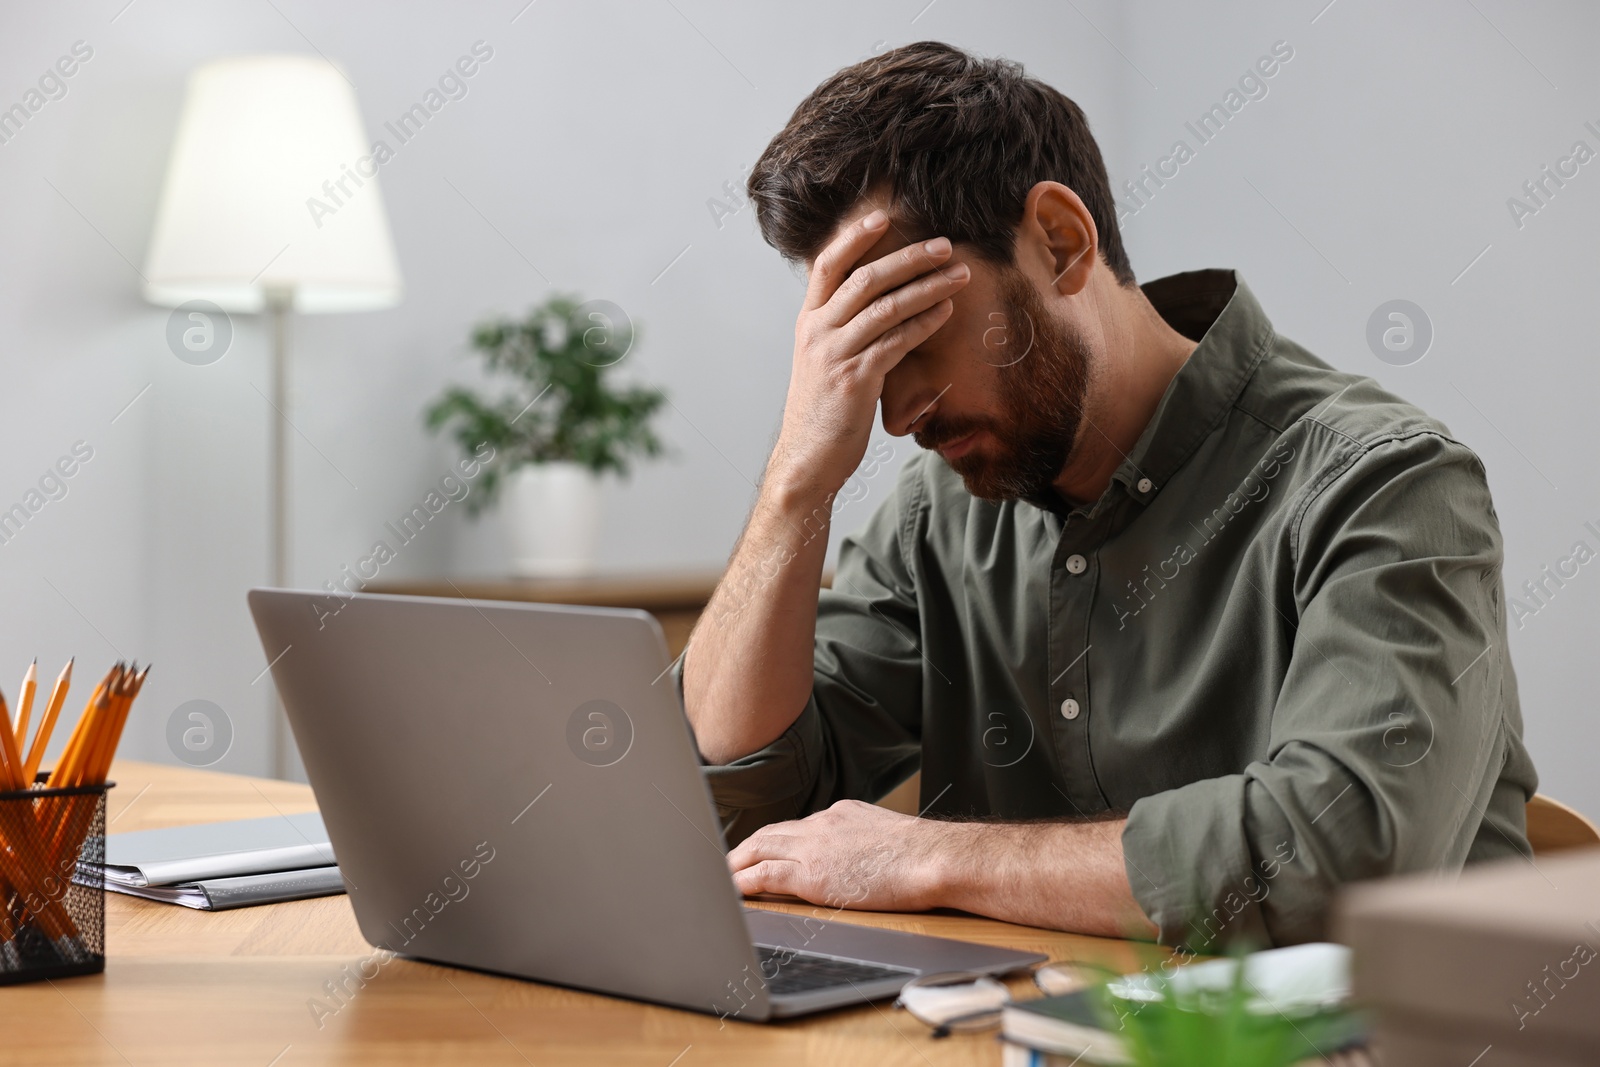 Photo of Tired man suffering from headache at workplace